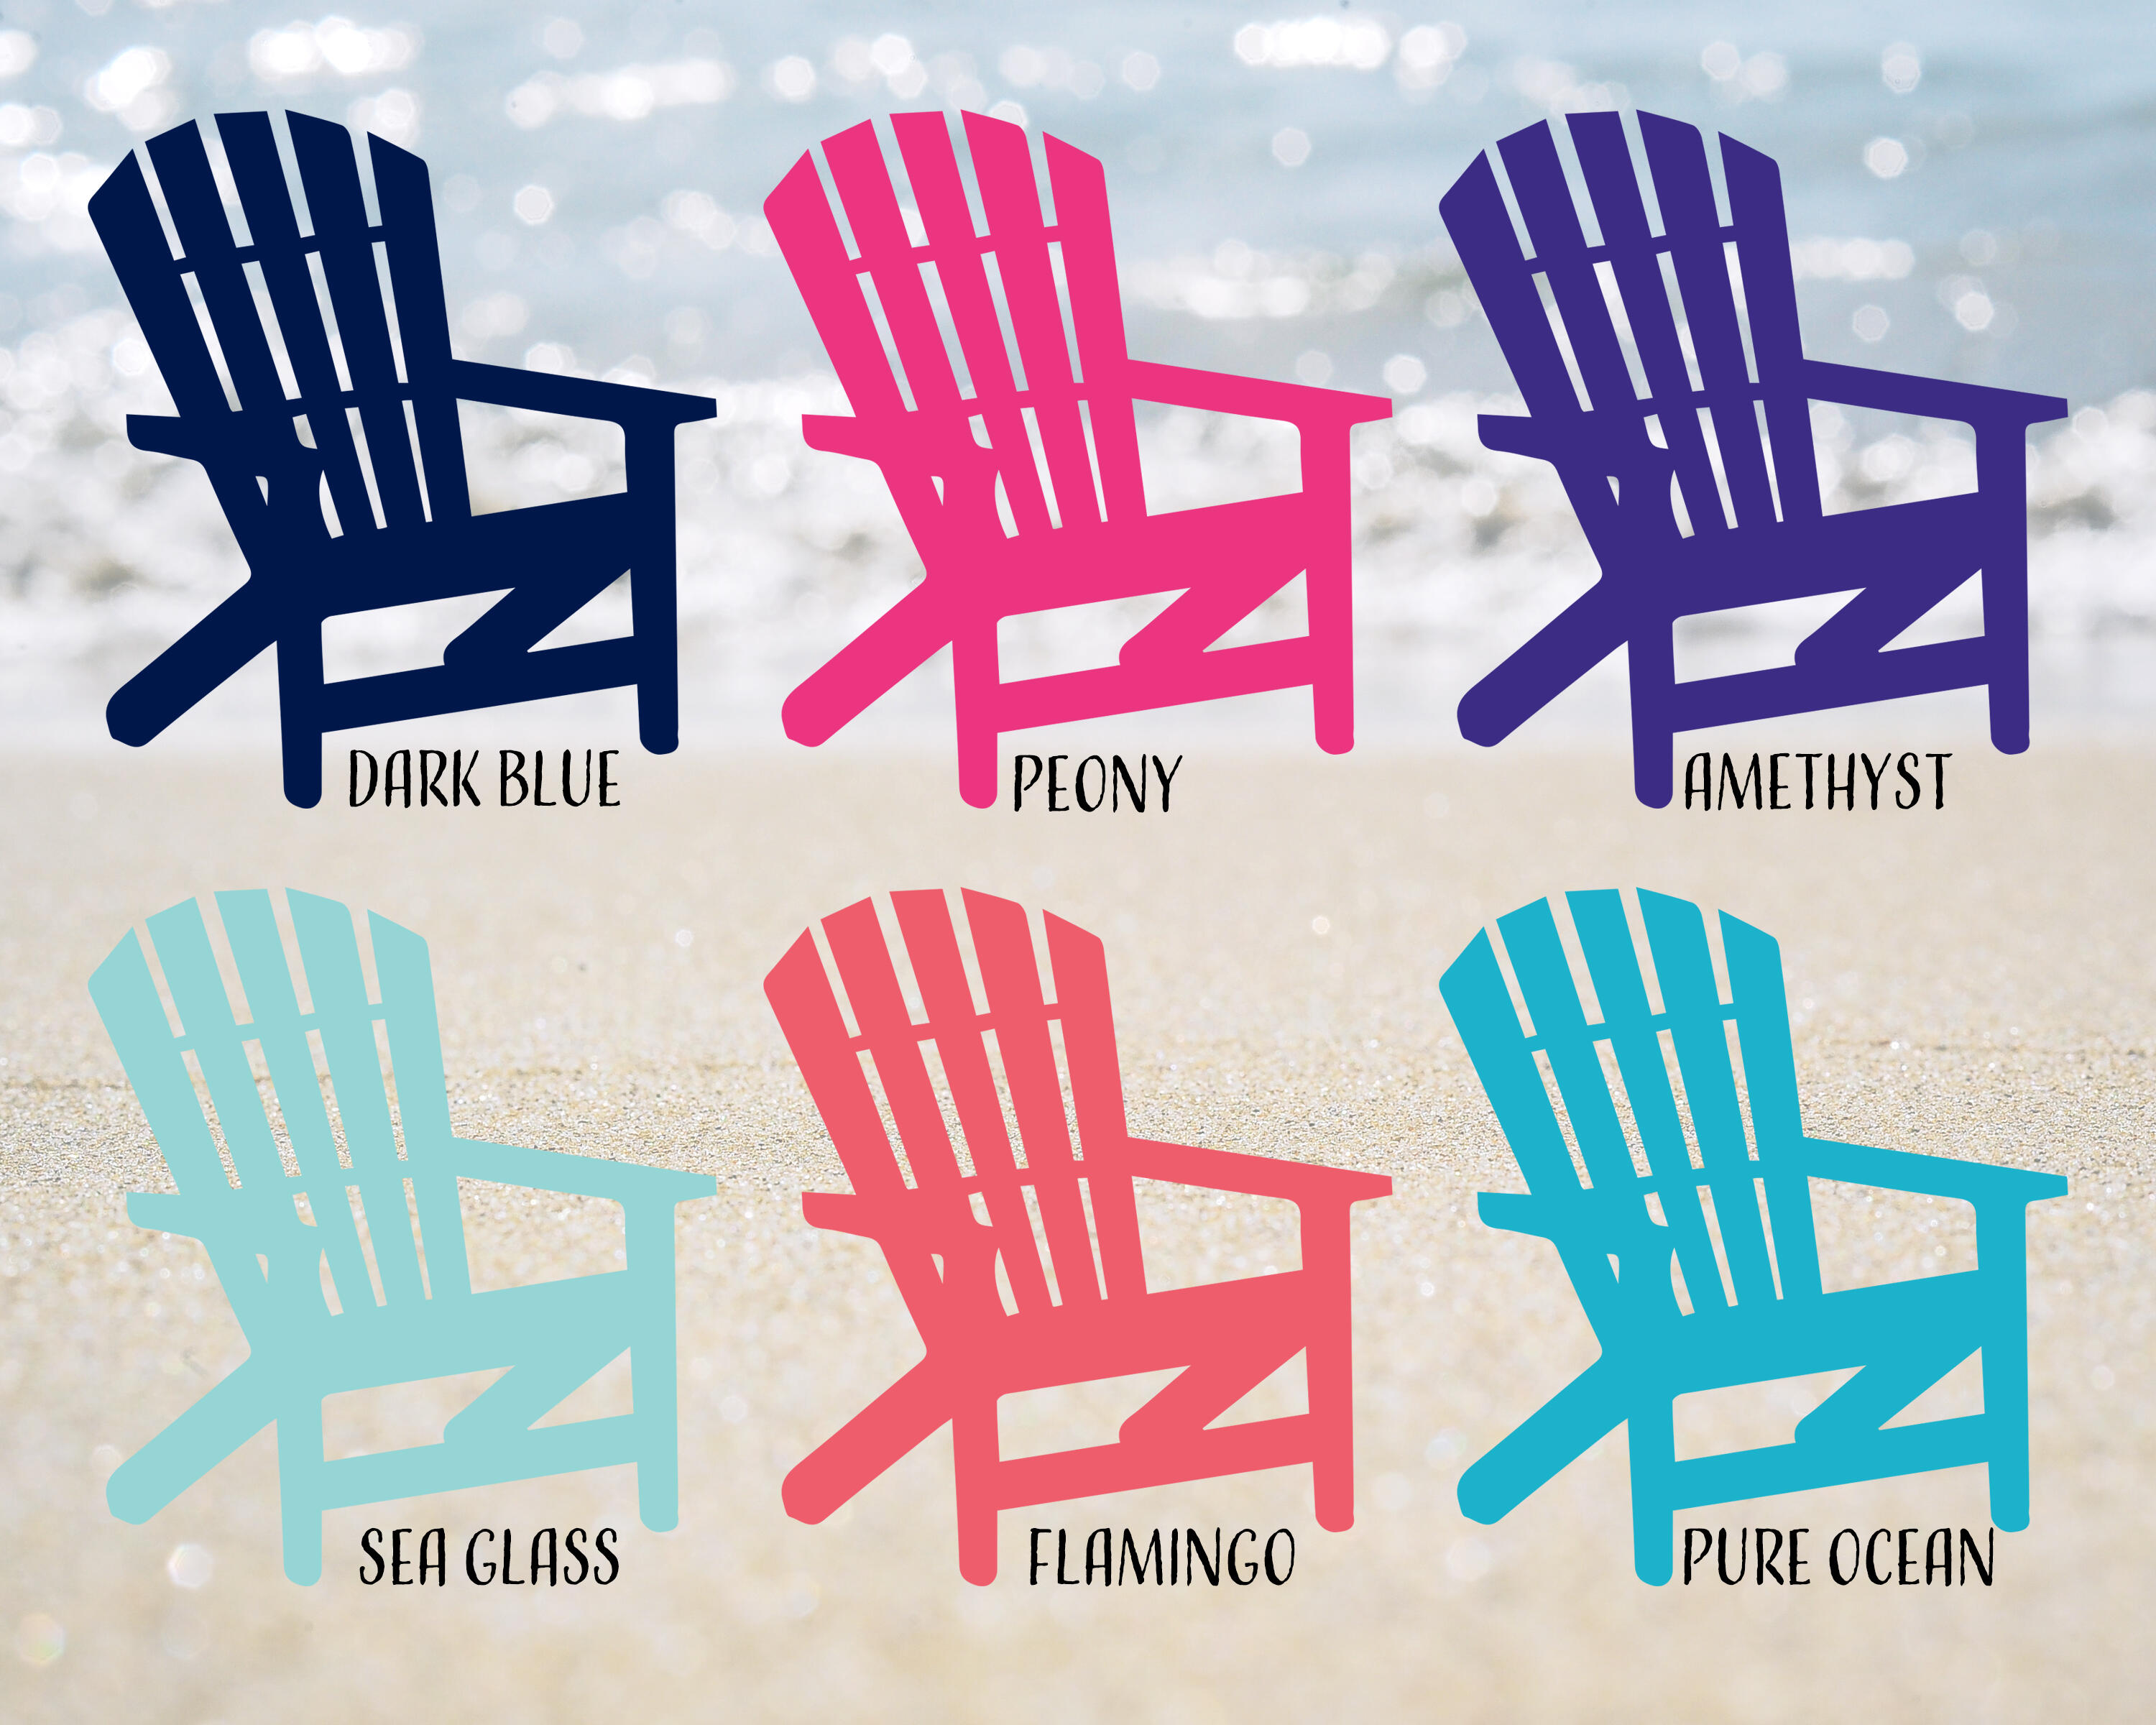 Beach More Worry Less, Coastal Sign with adirondack chair and resin starfish, bright ocean colors with tide waves and beach sand vibe.